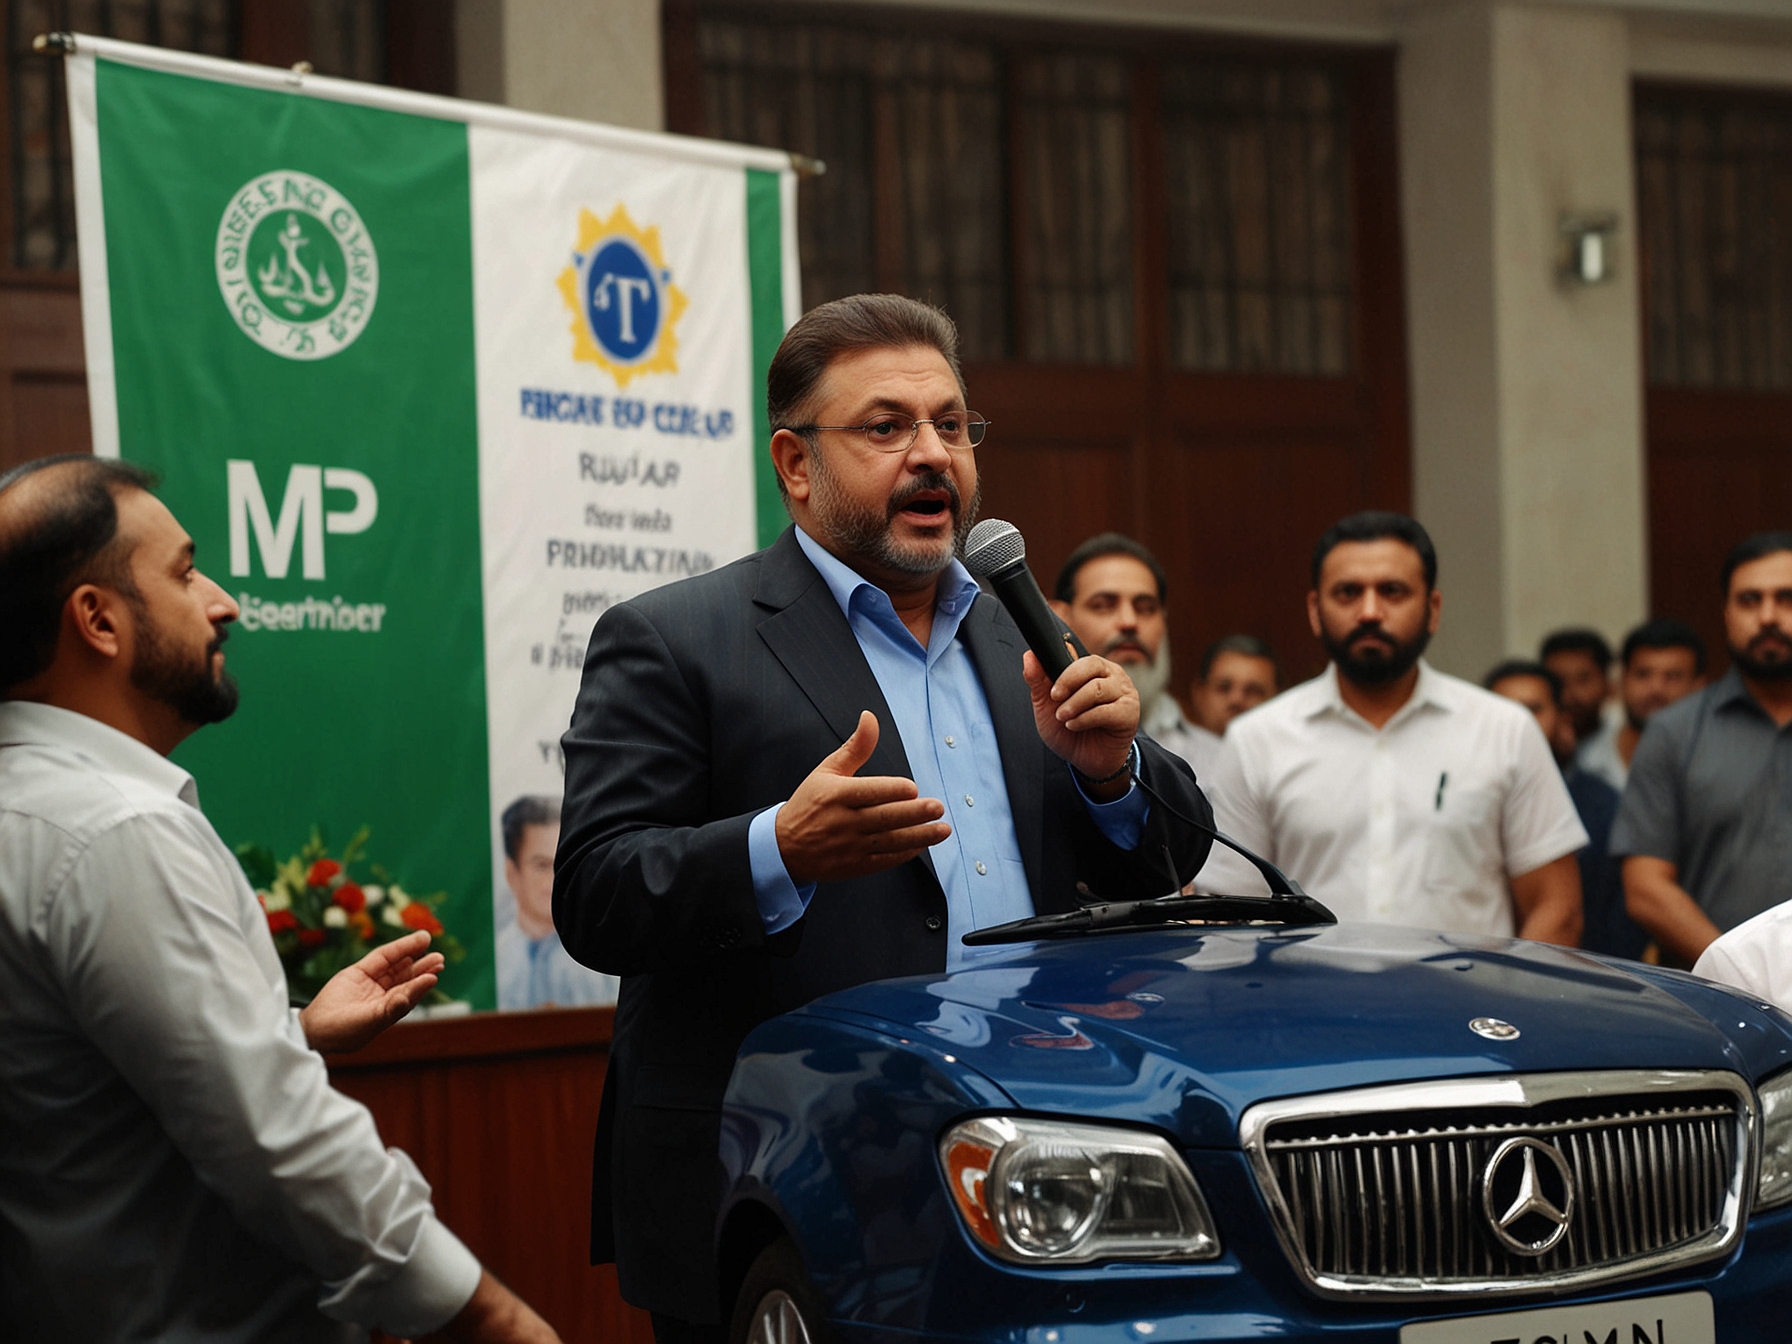 Image showing Minister Sharjeel Inam Memon addressing the attendees at the Sindh premium number plate auction, emphasizing the noble cause behind the event.